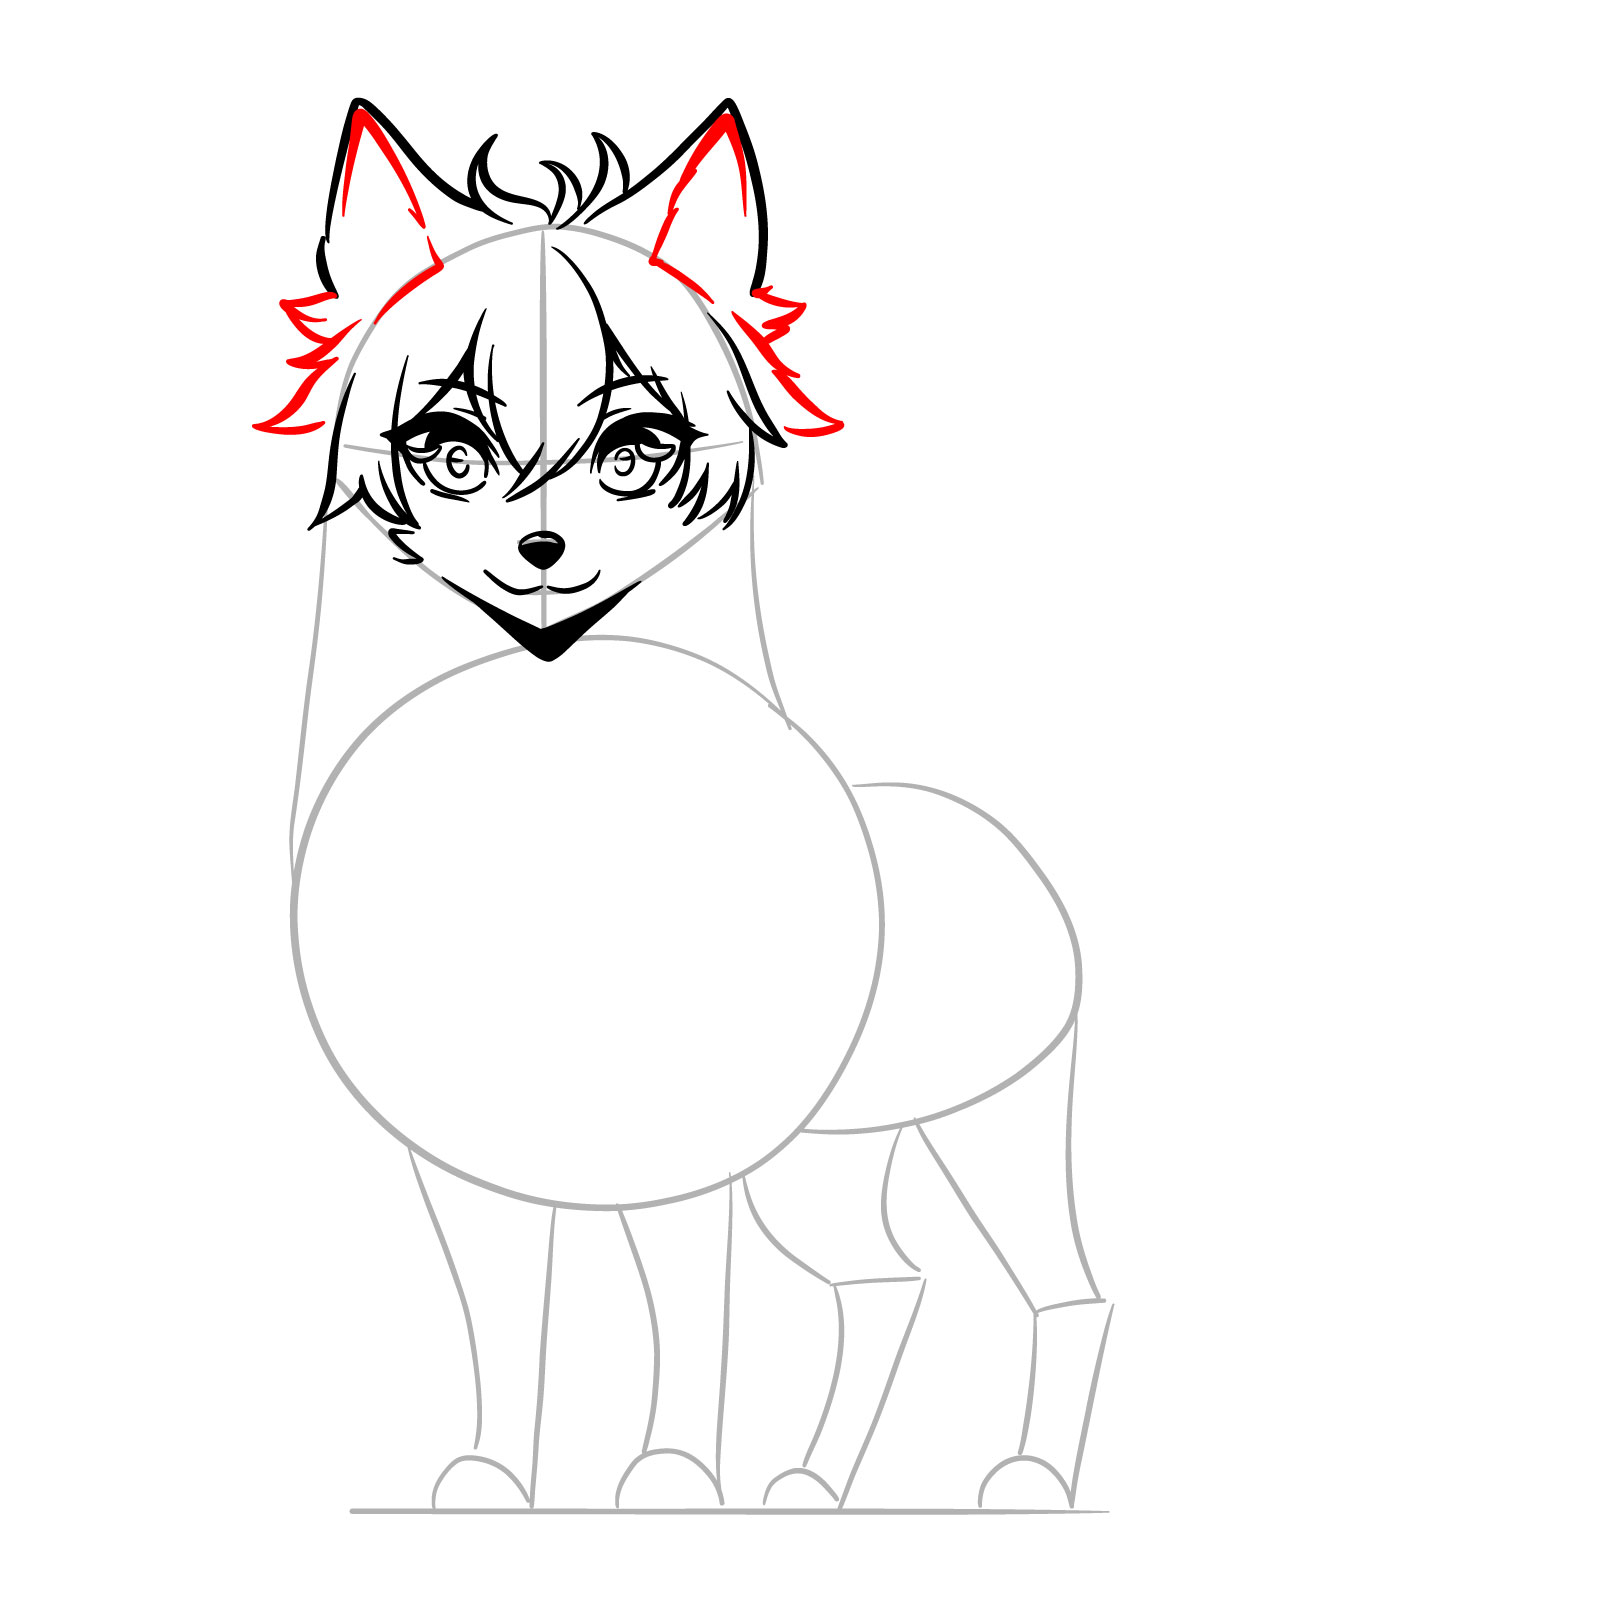 How to draw an anime wolf - finalizing the head details with ear and fur texture - step 09